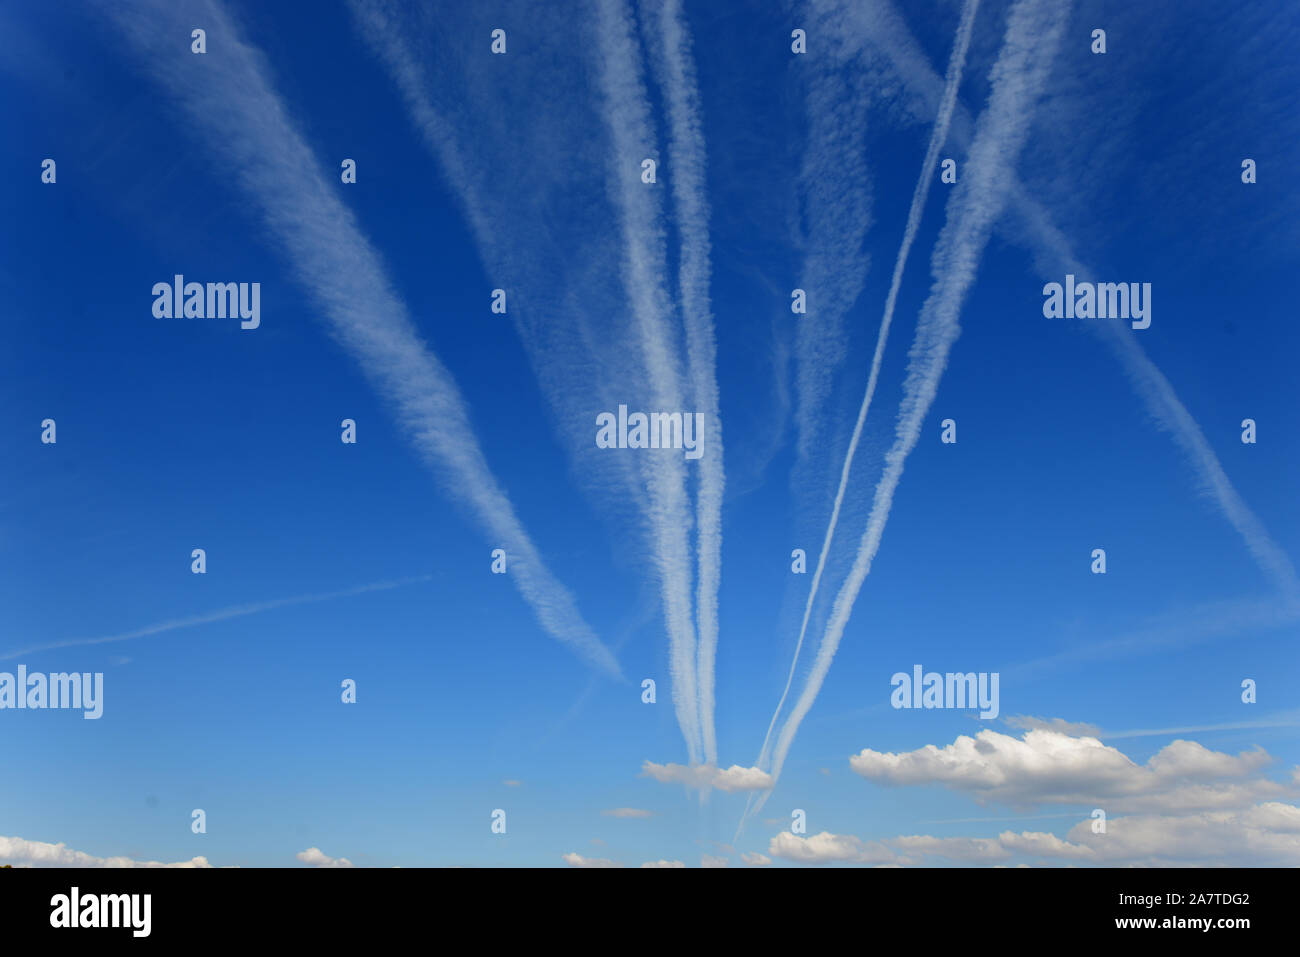 Vapour Trails, Contrails, Condensation Trails, Line-Shaped Clouds or Homogenitus Converging to Vanishing Point in Blue Sky Stock Photo